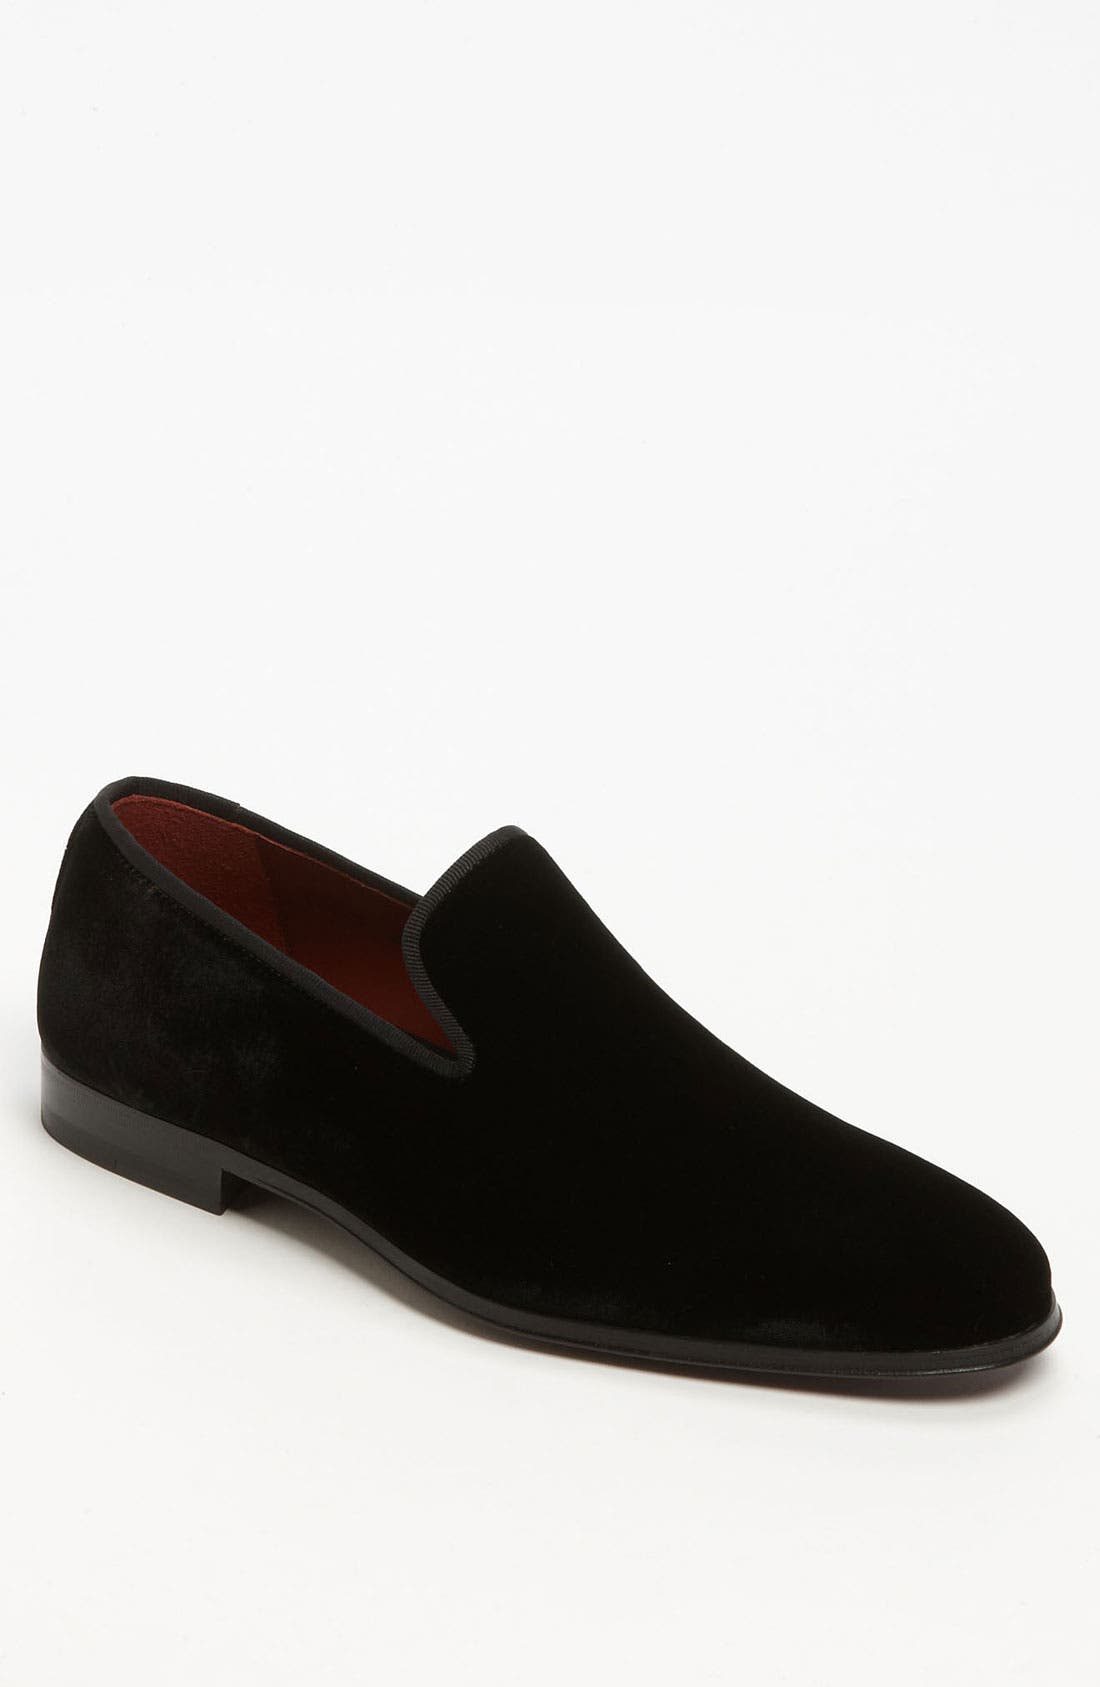 magnanni blue suede loafers